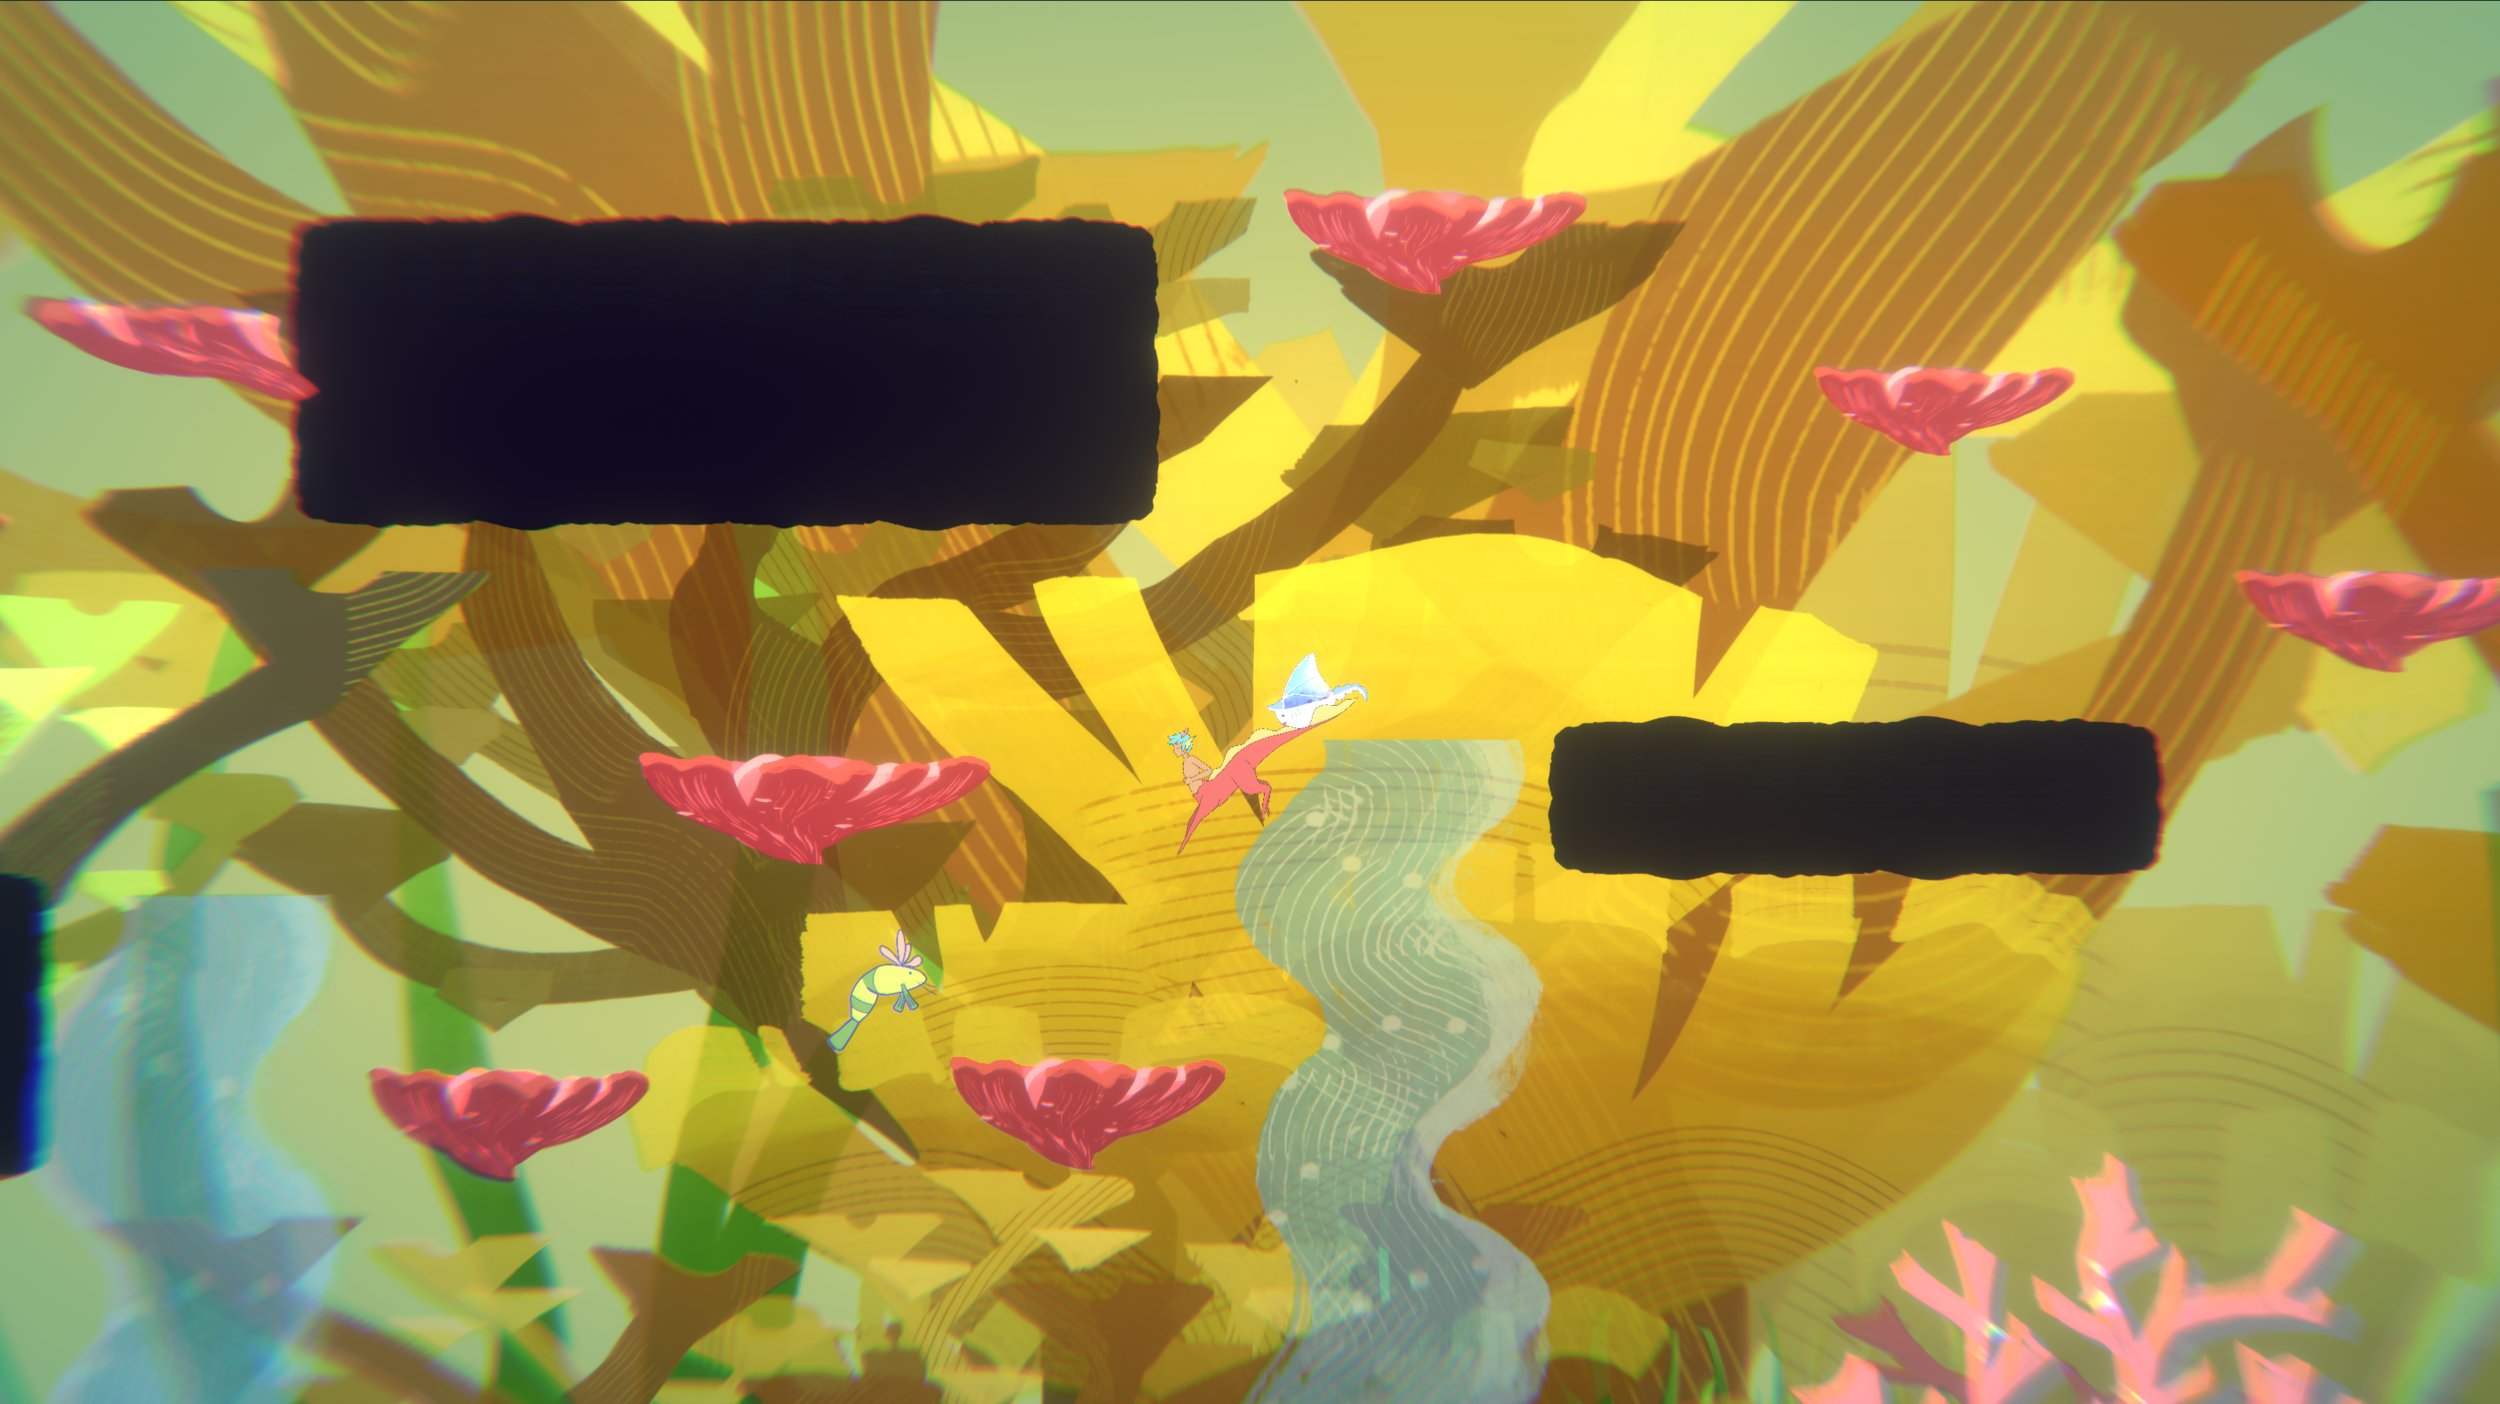  The Golden Elkhorn section of Coral Forest. The player can ride currents to reach higher areas of the level. 